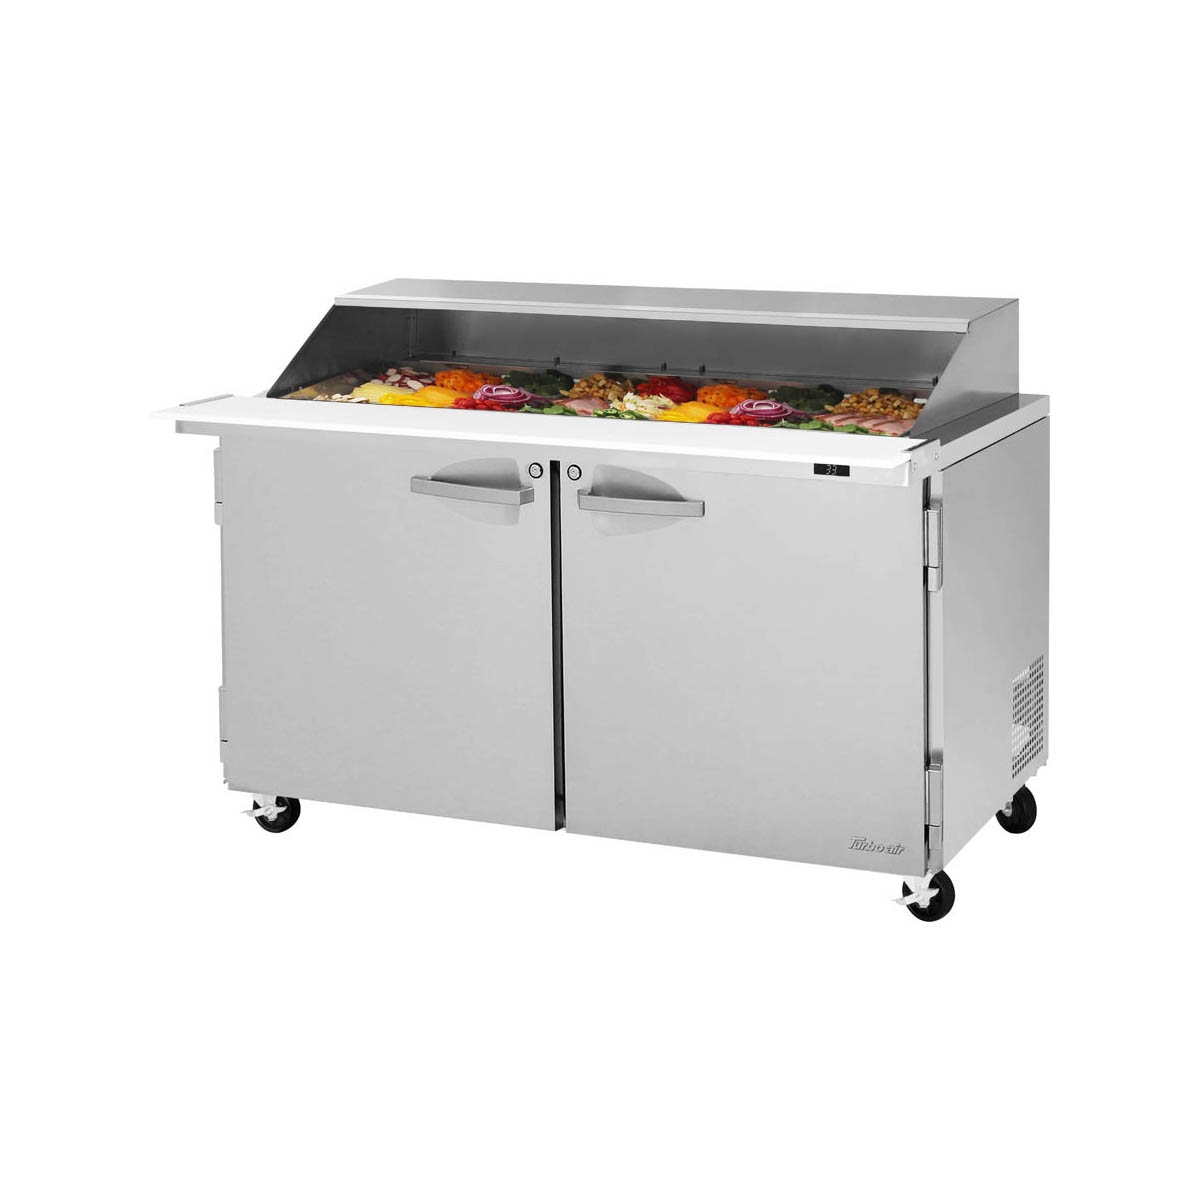 Turbo Air PST-60-24-N-SL 60″ Two Section Mega Top Sandwich Prep Table, 24 Pan